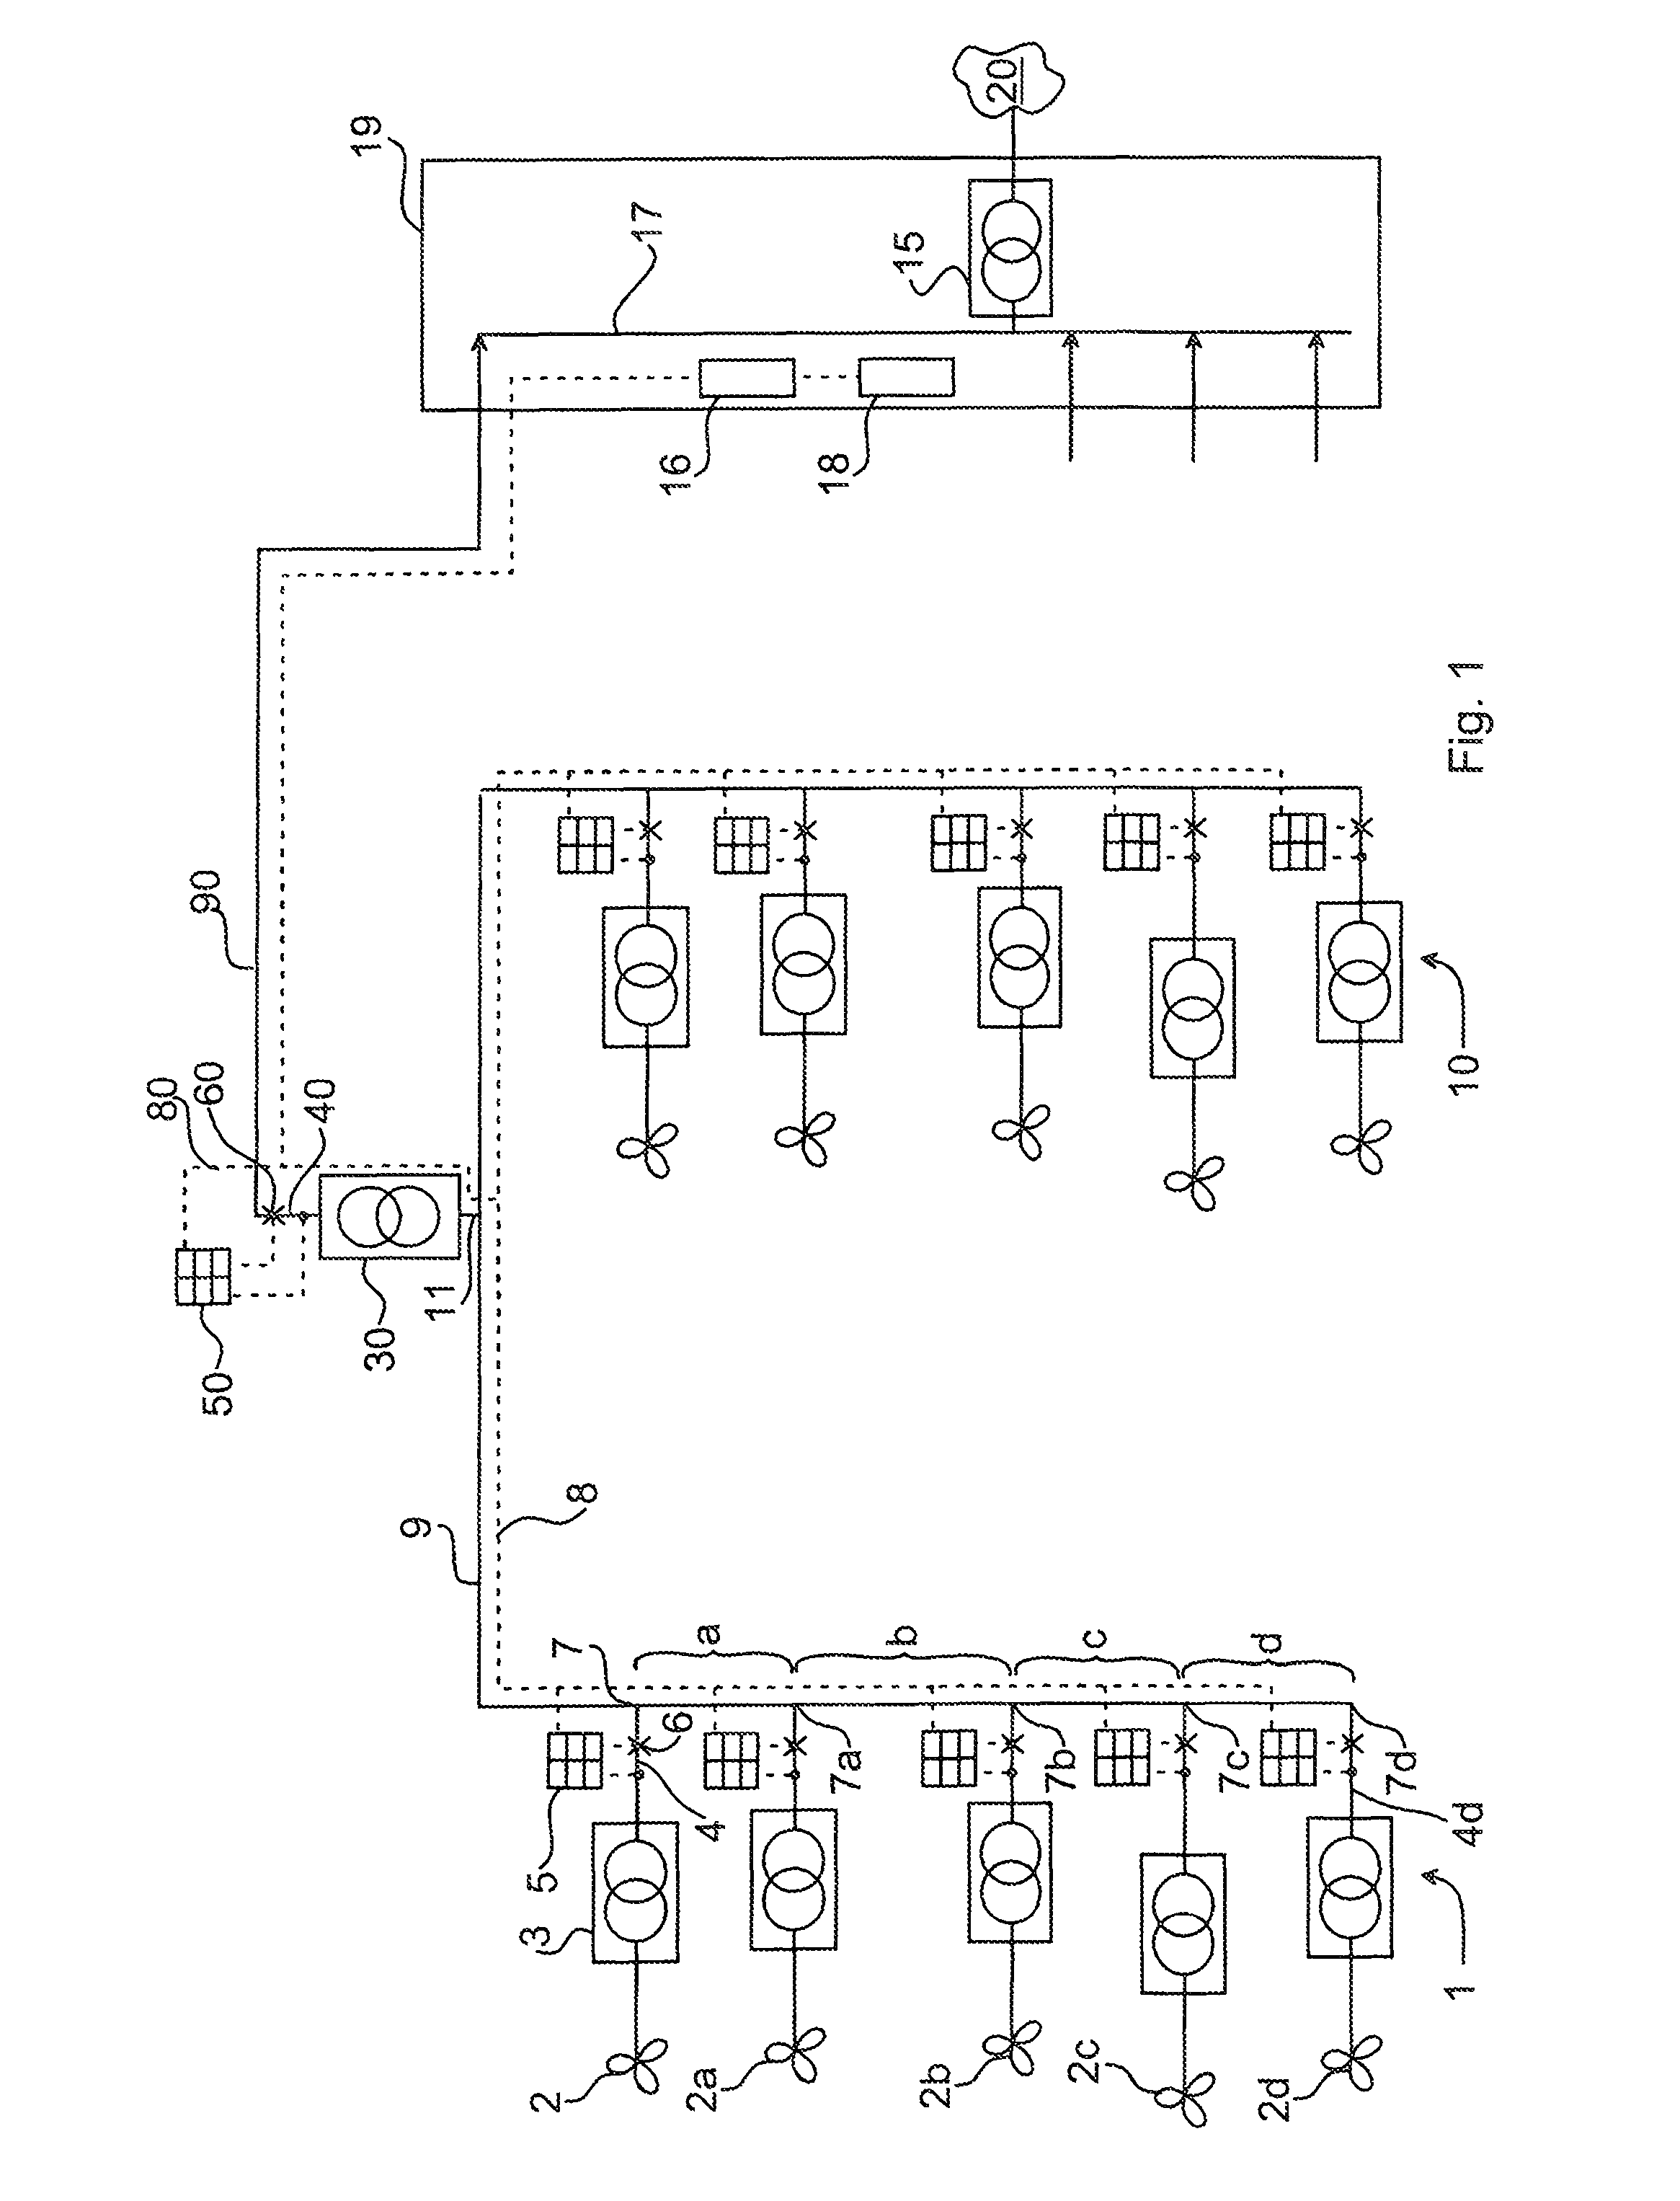 System and method for protecting an electrical power grid